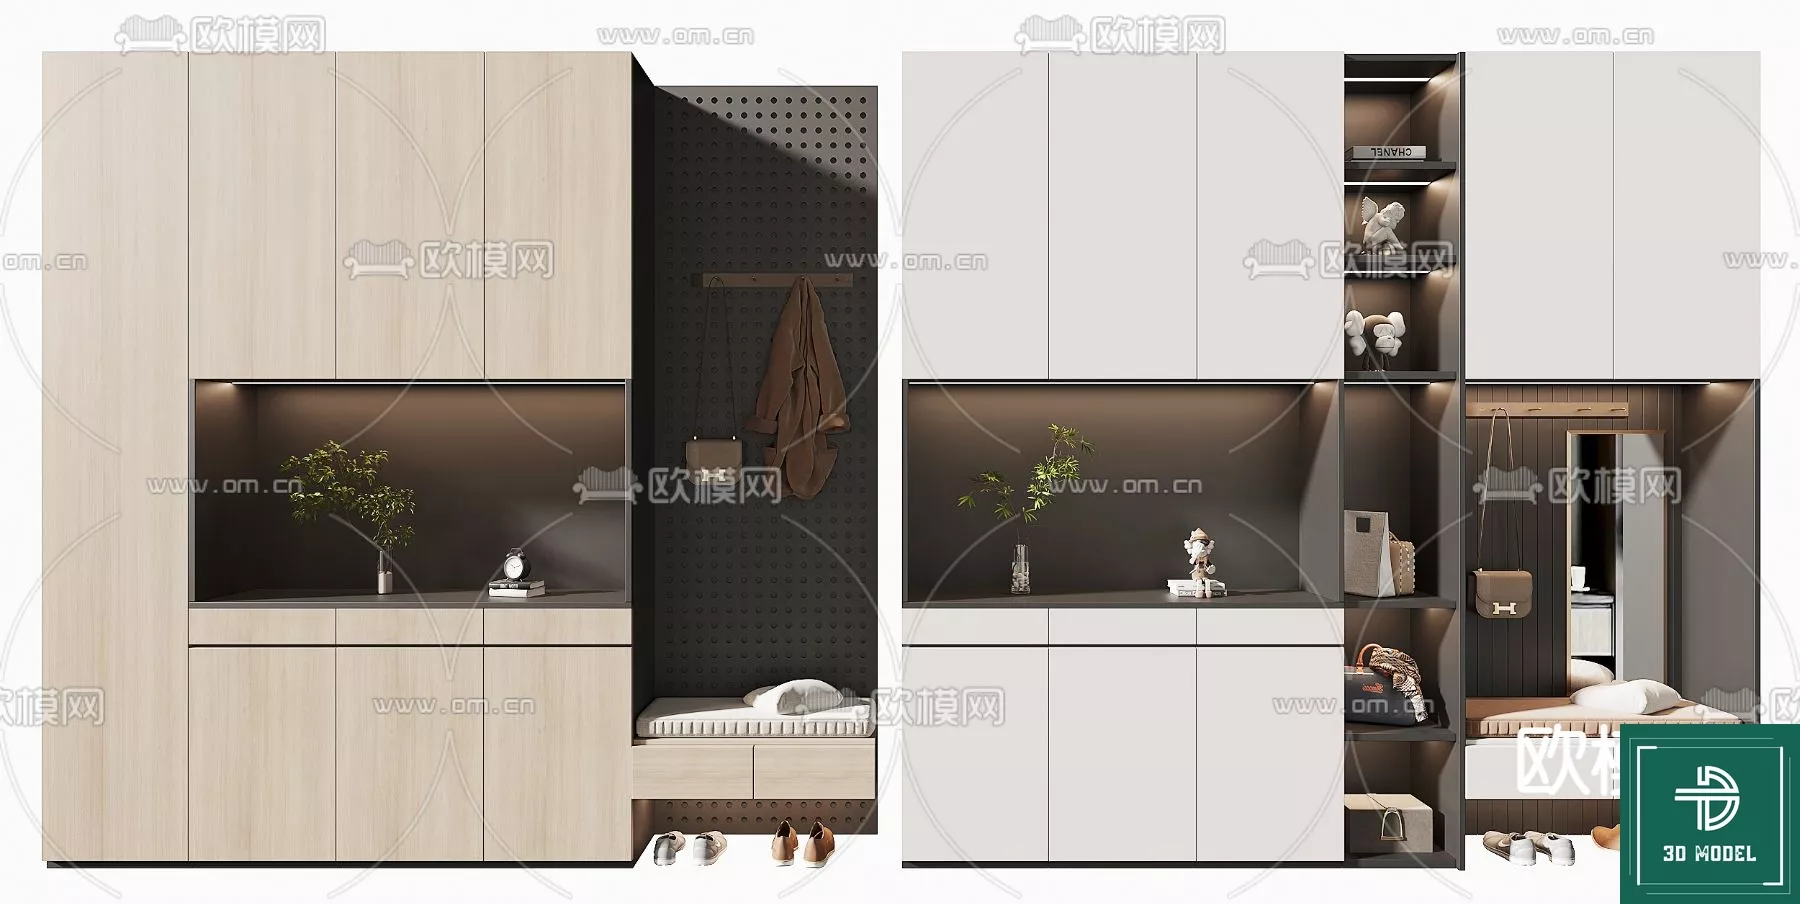 MODERN SHOES CABINET - SKETCHUP 3D MODEL - VRAY OR ENSCAPE - ID12798